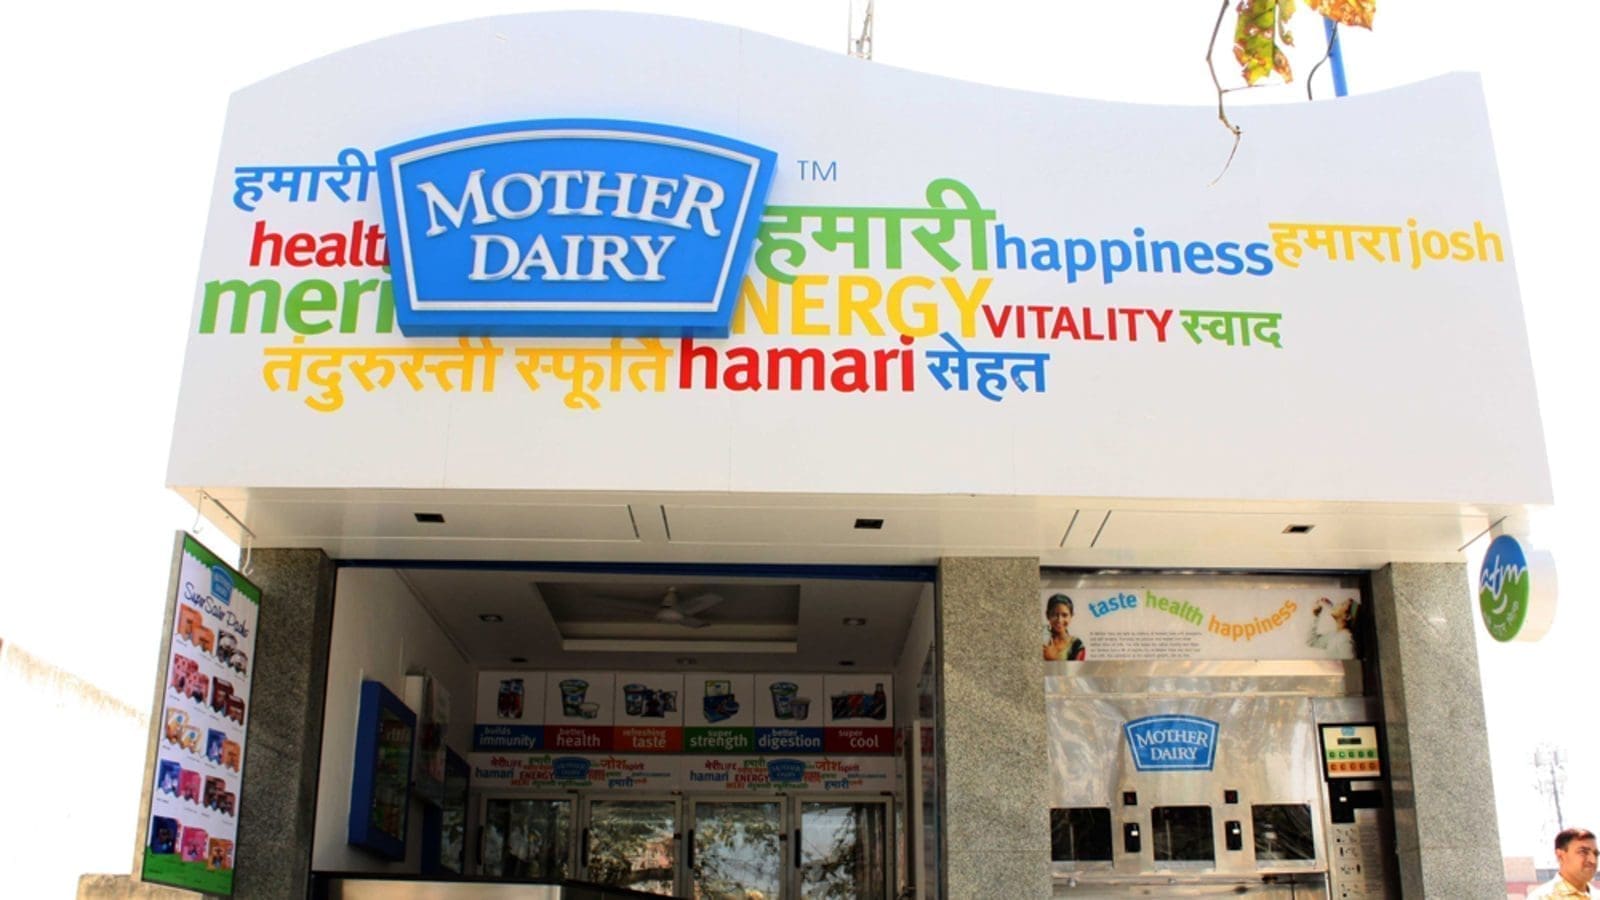 Mother Dairy to open 700 new locations in New Delhi by 2023, Cocoberry eyes 25 new yogurt outlets by end of the year